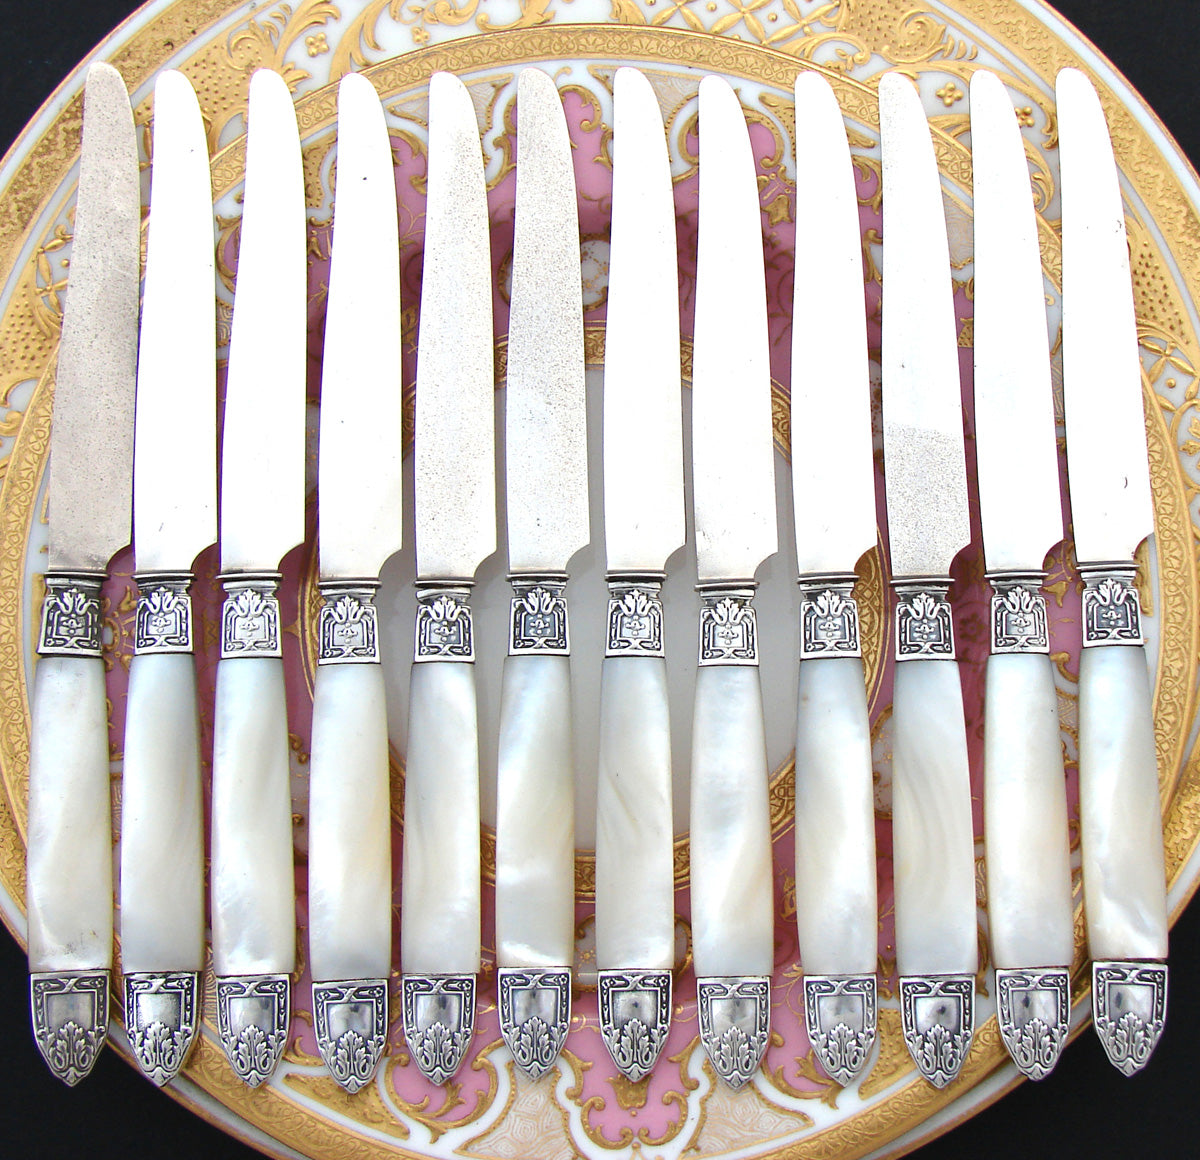 Antique French Hallmarked Silver & Mother of Pearl 12pc Knife Set, Classical Acanthus